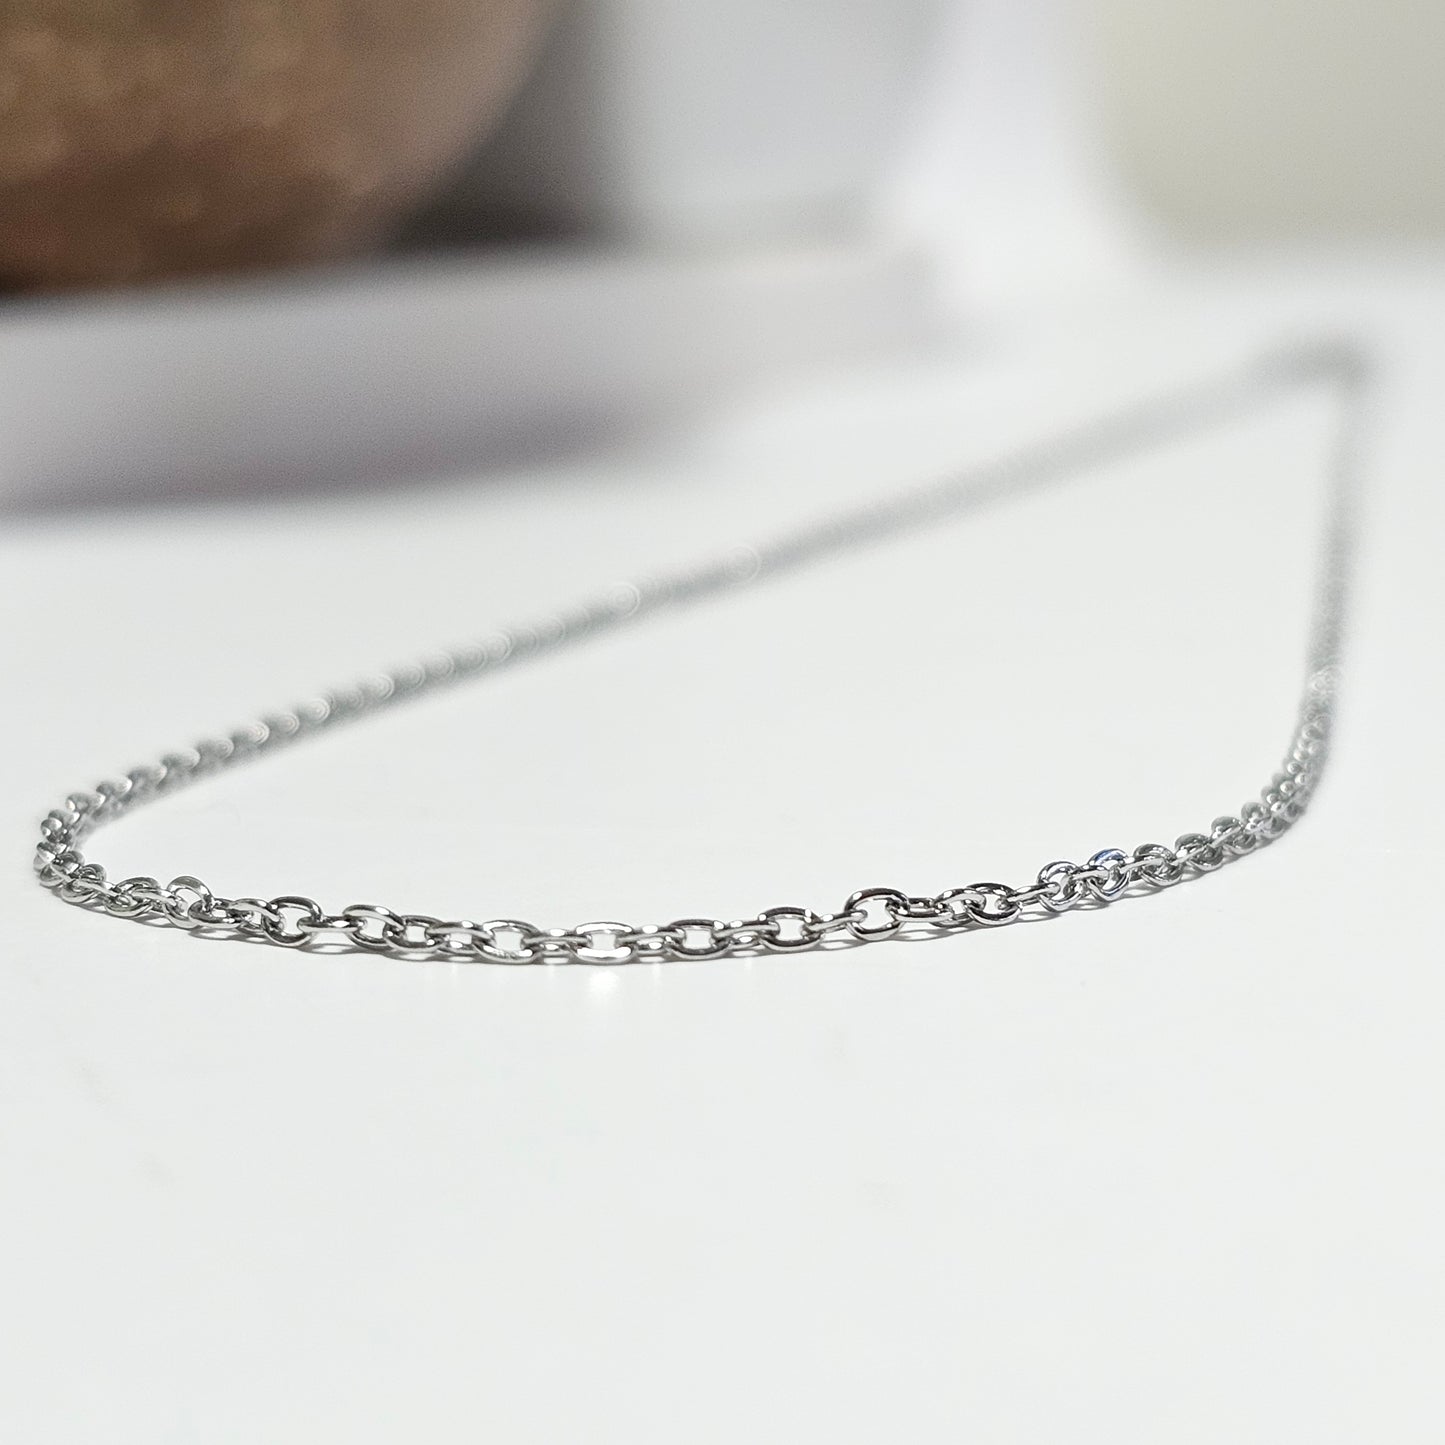 Pendant Upgrade | 45cm Stainless Steel Chain Add-On